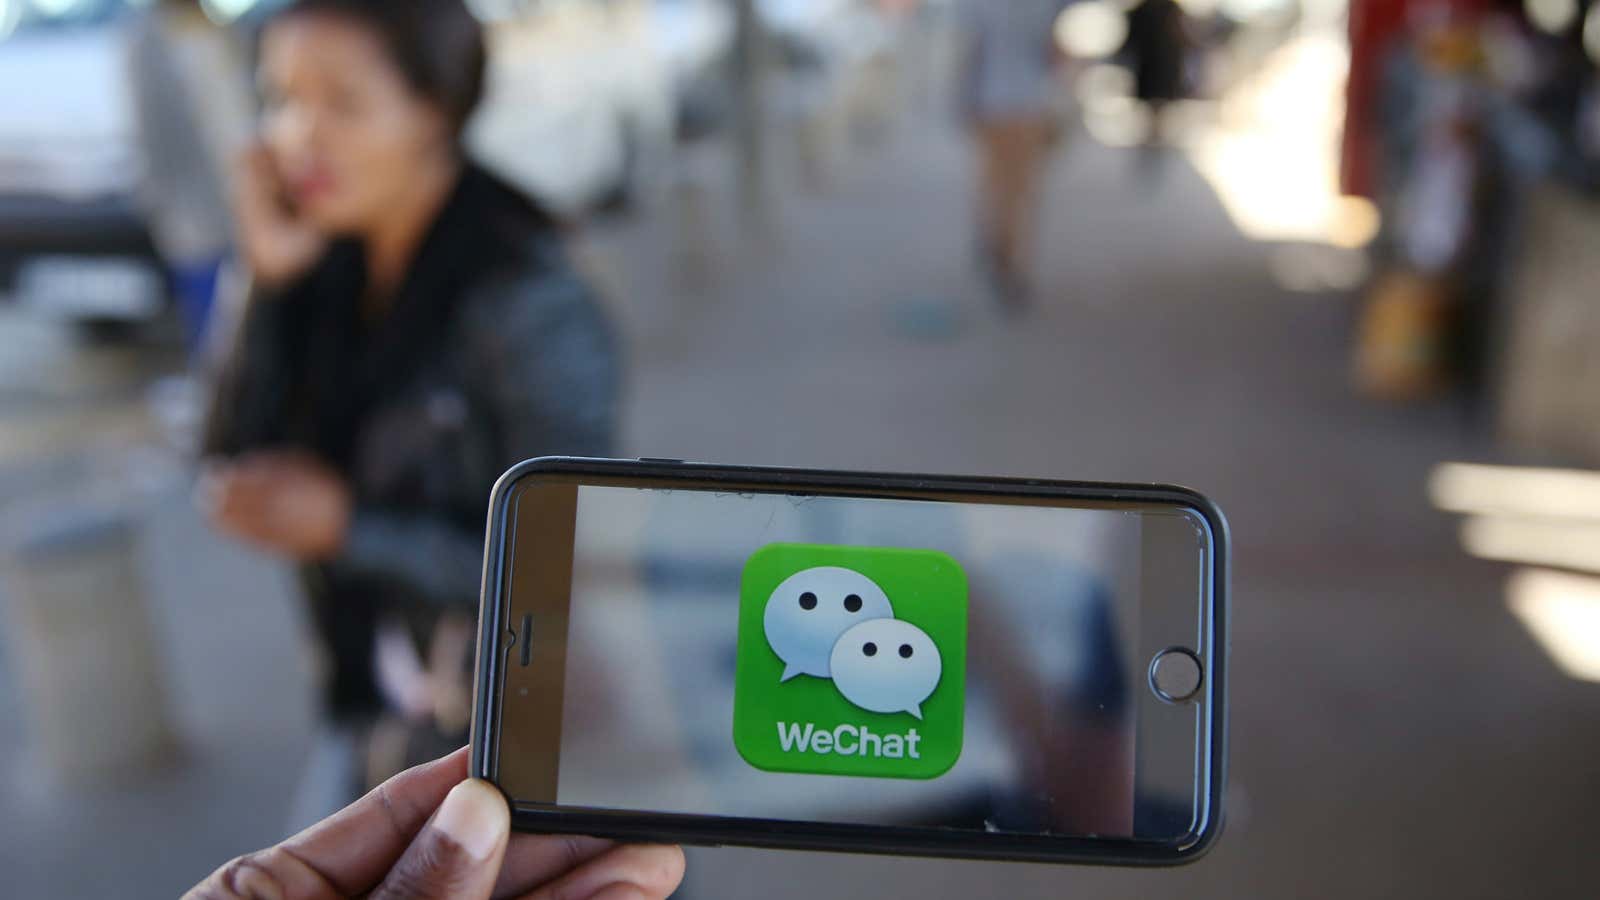 China is censoring people’s chats without them even knowing about it